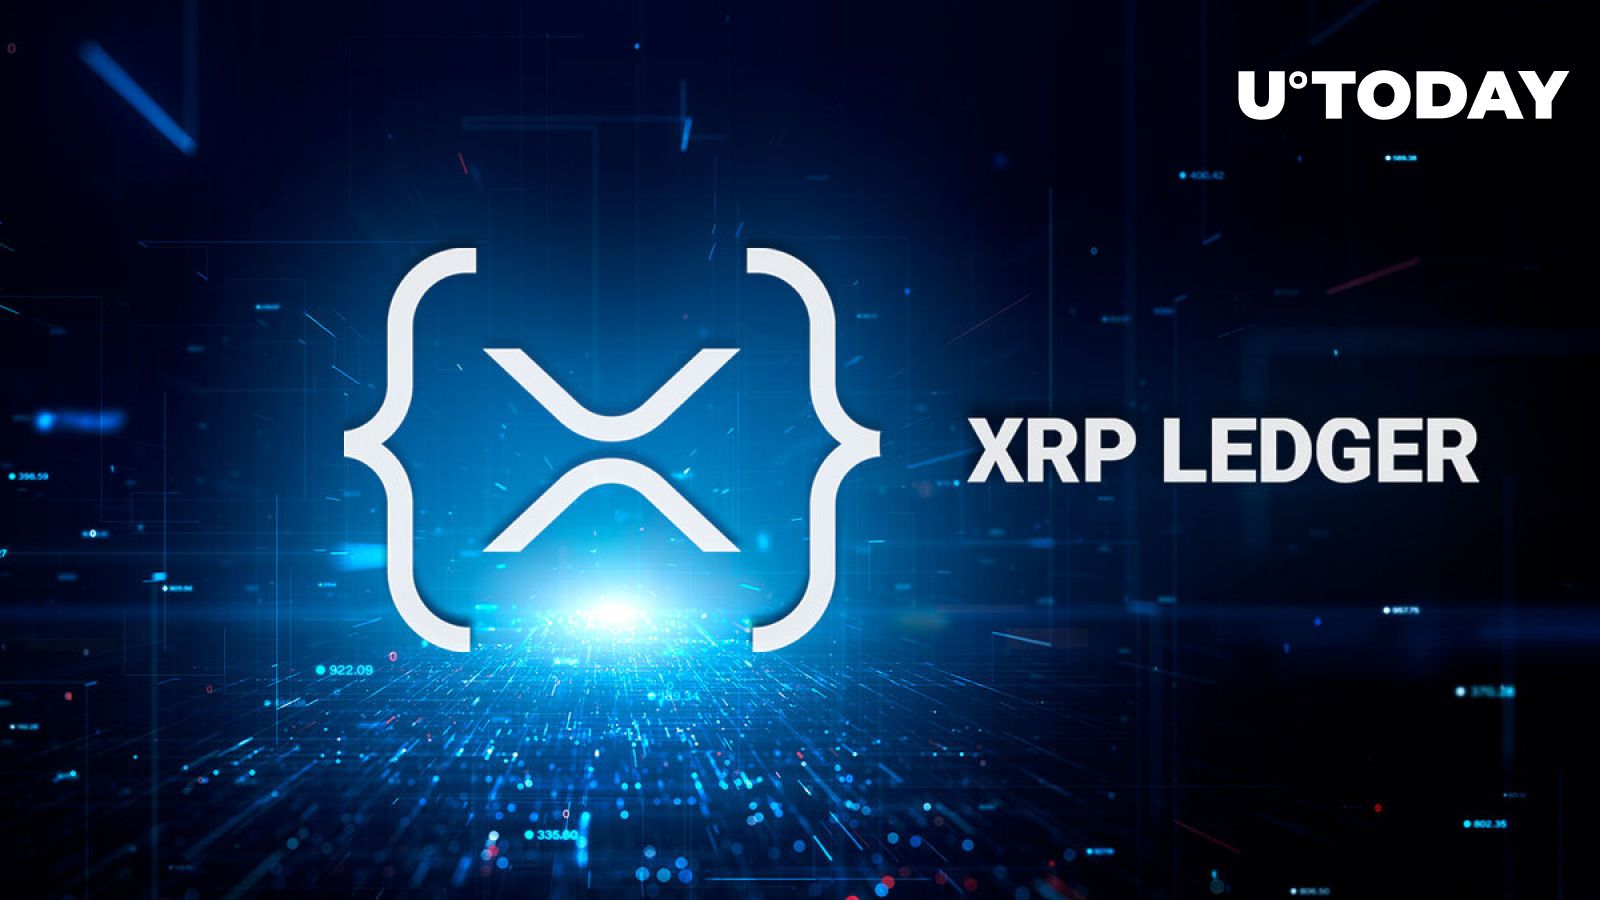 XRP Ledger Witnesses Unusual 350% Transaction Spike, But There’s a Catch